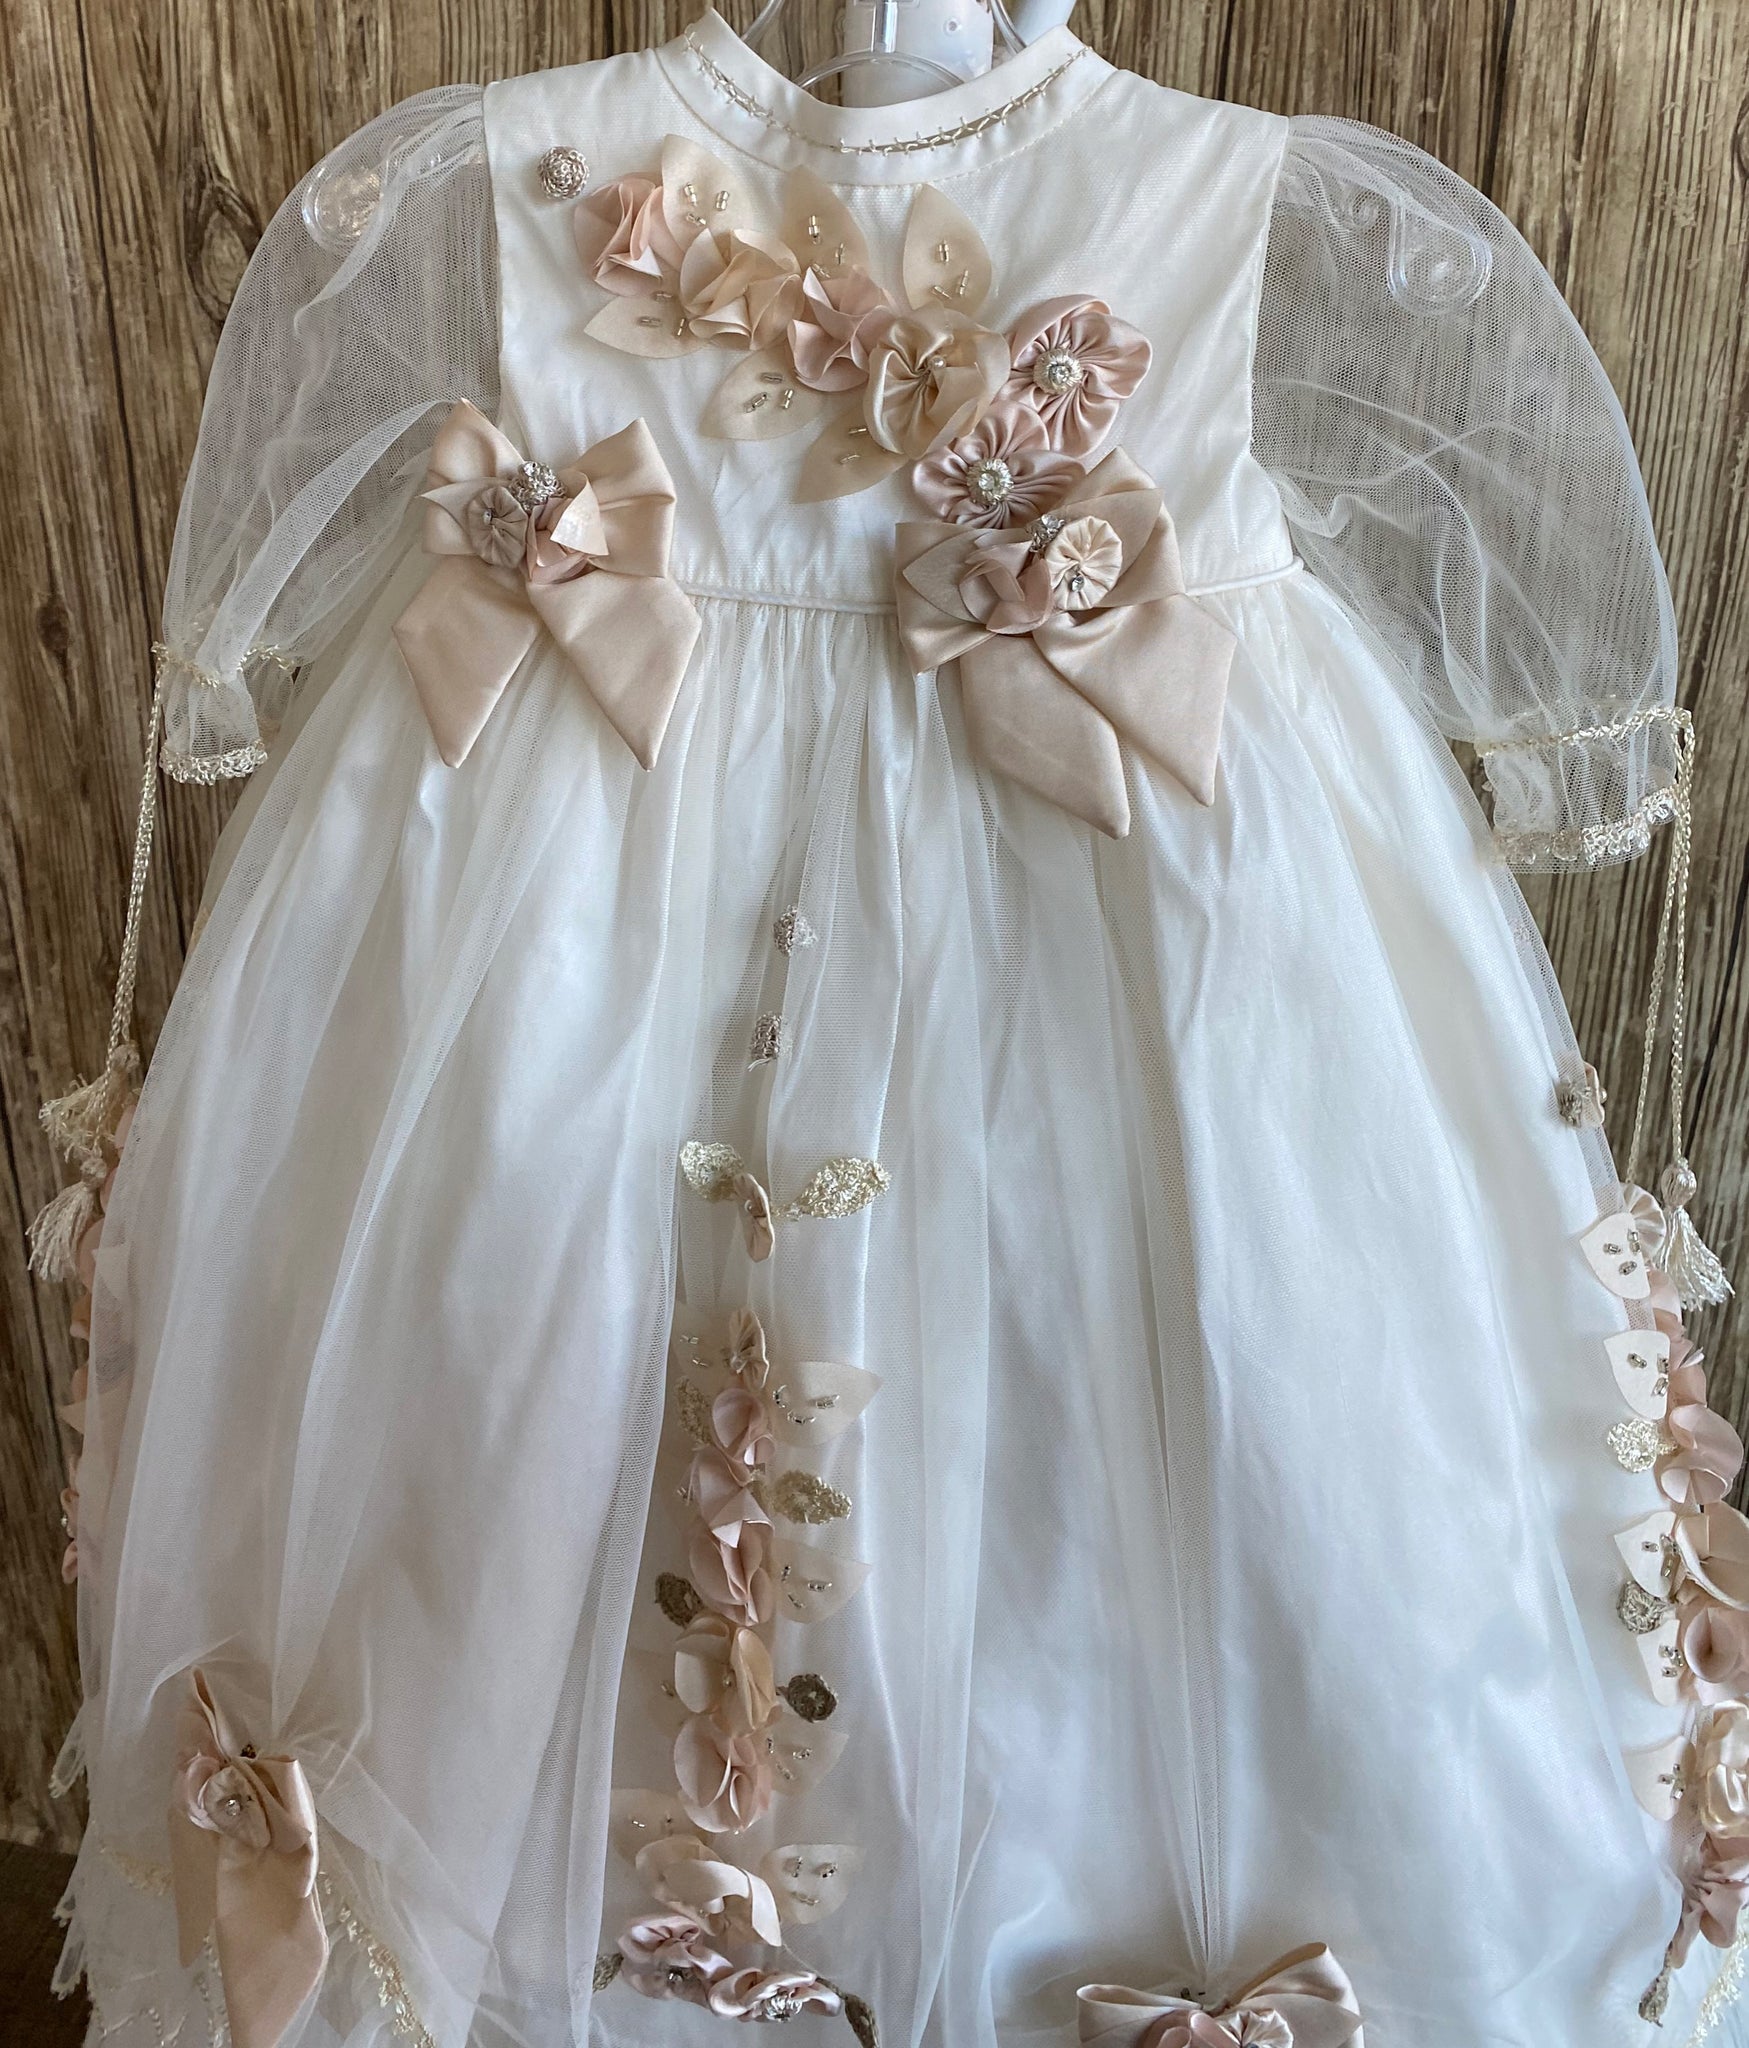 his a beautiful, one-of-a-kind baptism gown.  A lovely gown for a precious child.  Dress, Ivory, size 12M Satin bodice with dusty rose flower detailing Tulle half sleeve Large Champaign bows with flower center Dusty rose and Champaign flower pleats along tulle skirting Champaign bows on edge of skirting with tulle edge Slip  Satin bodice Layer one- thin pleated tulle overlay Layer two- tulle overlay with flowers Layer three- thick pleated tulle overlay